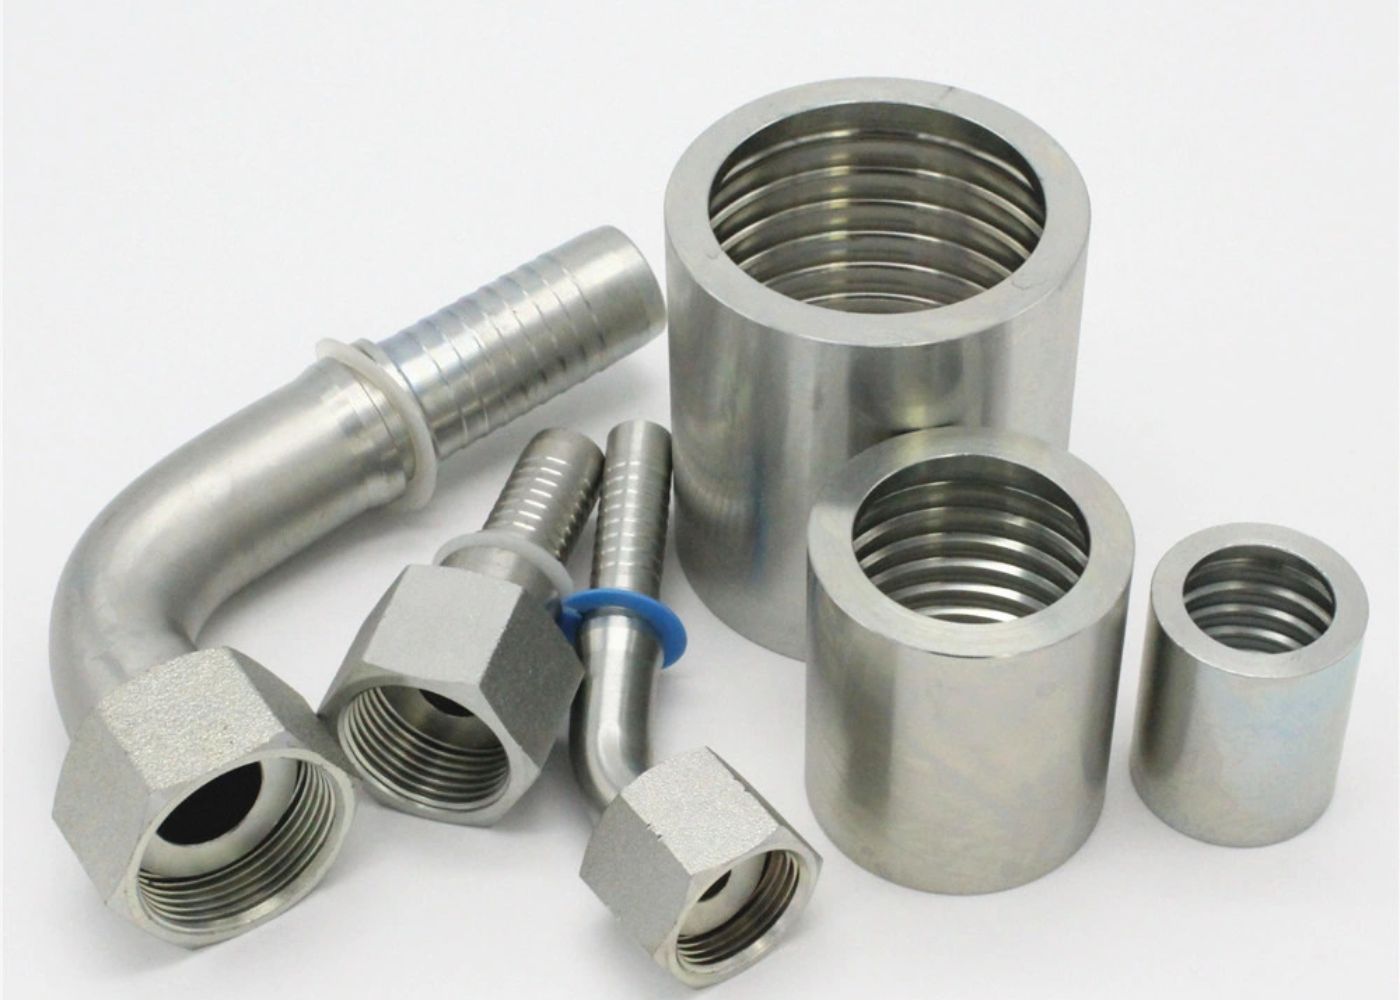 Hydraulic Fittings Manufacturers in India